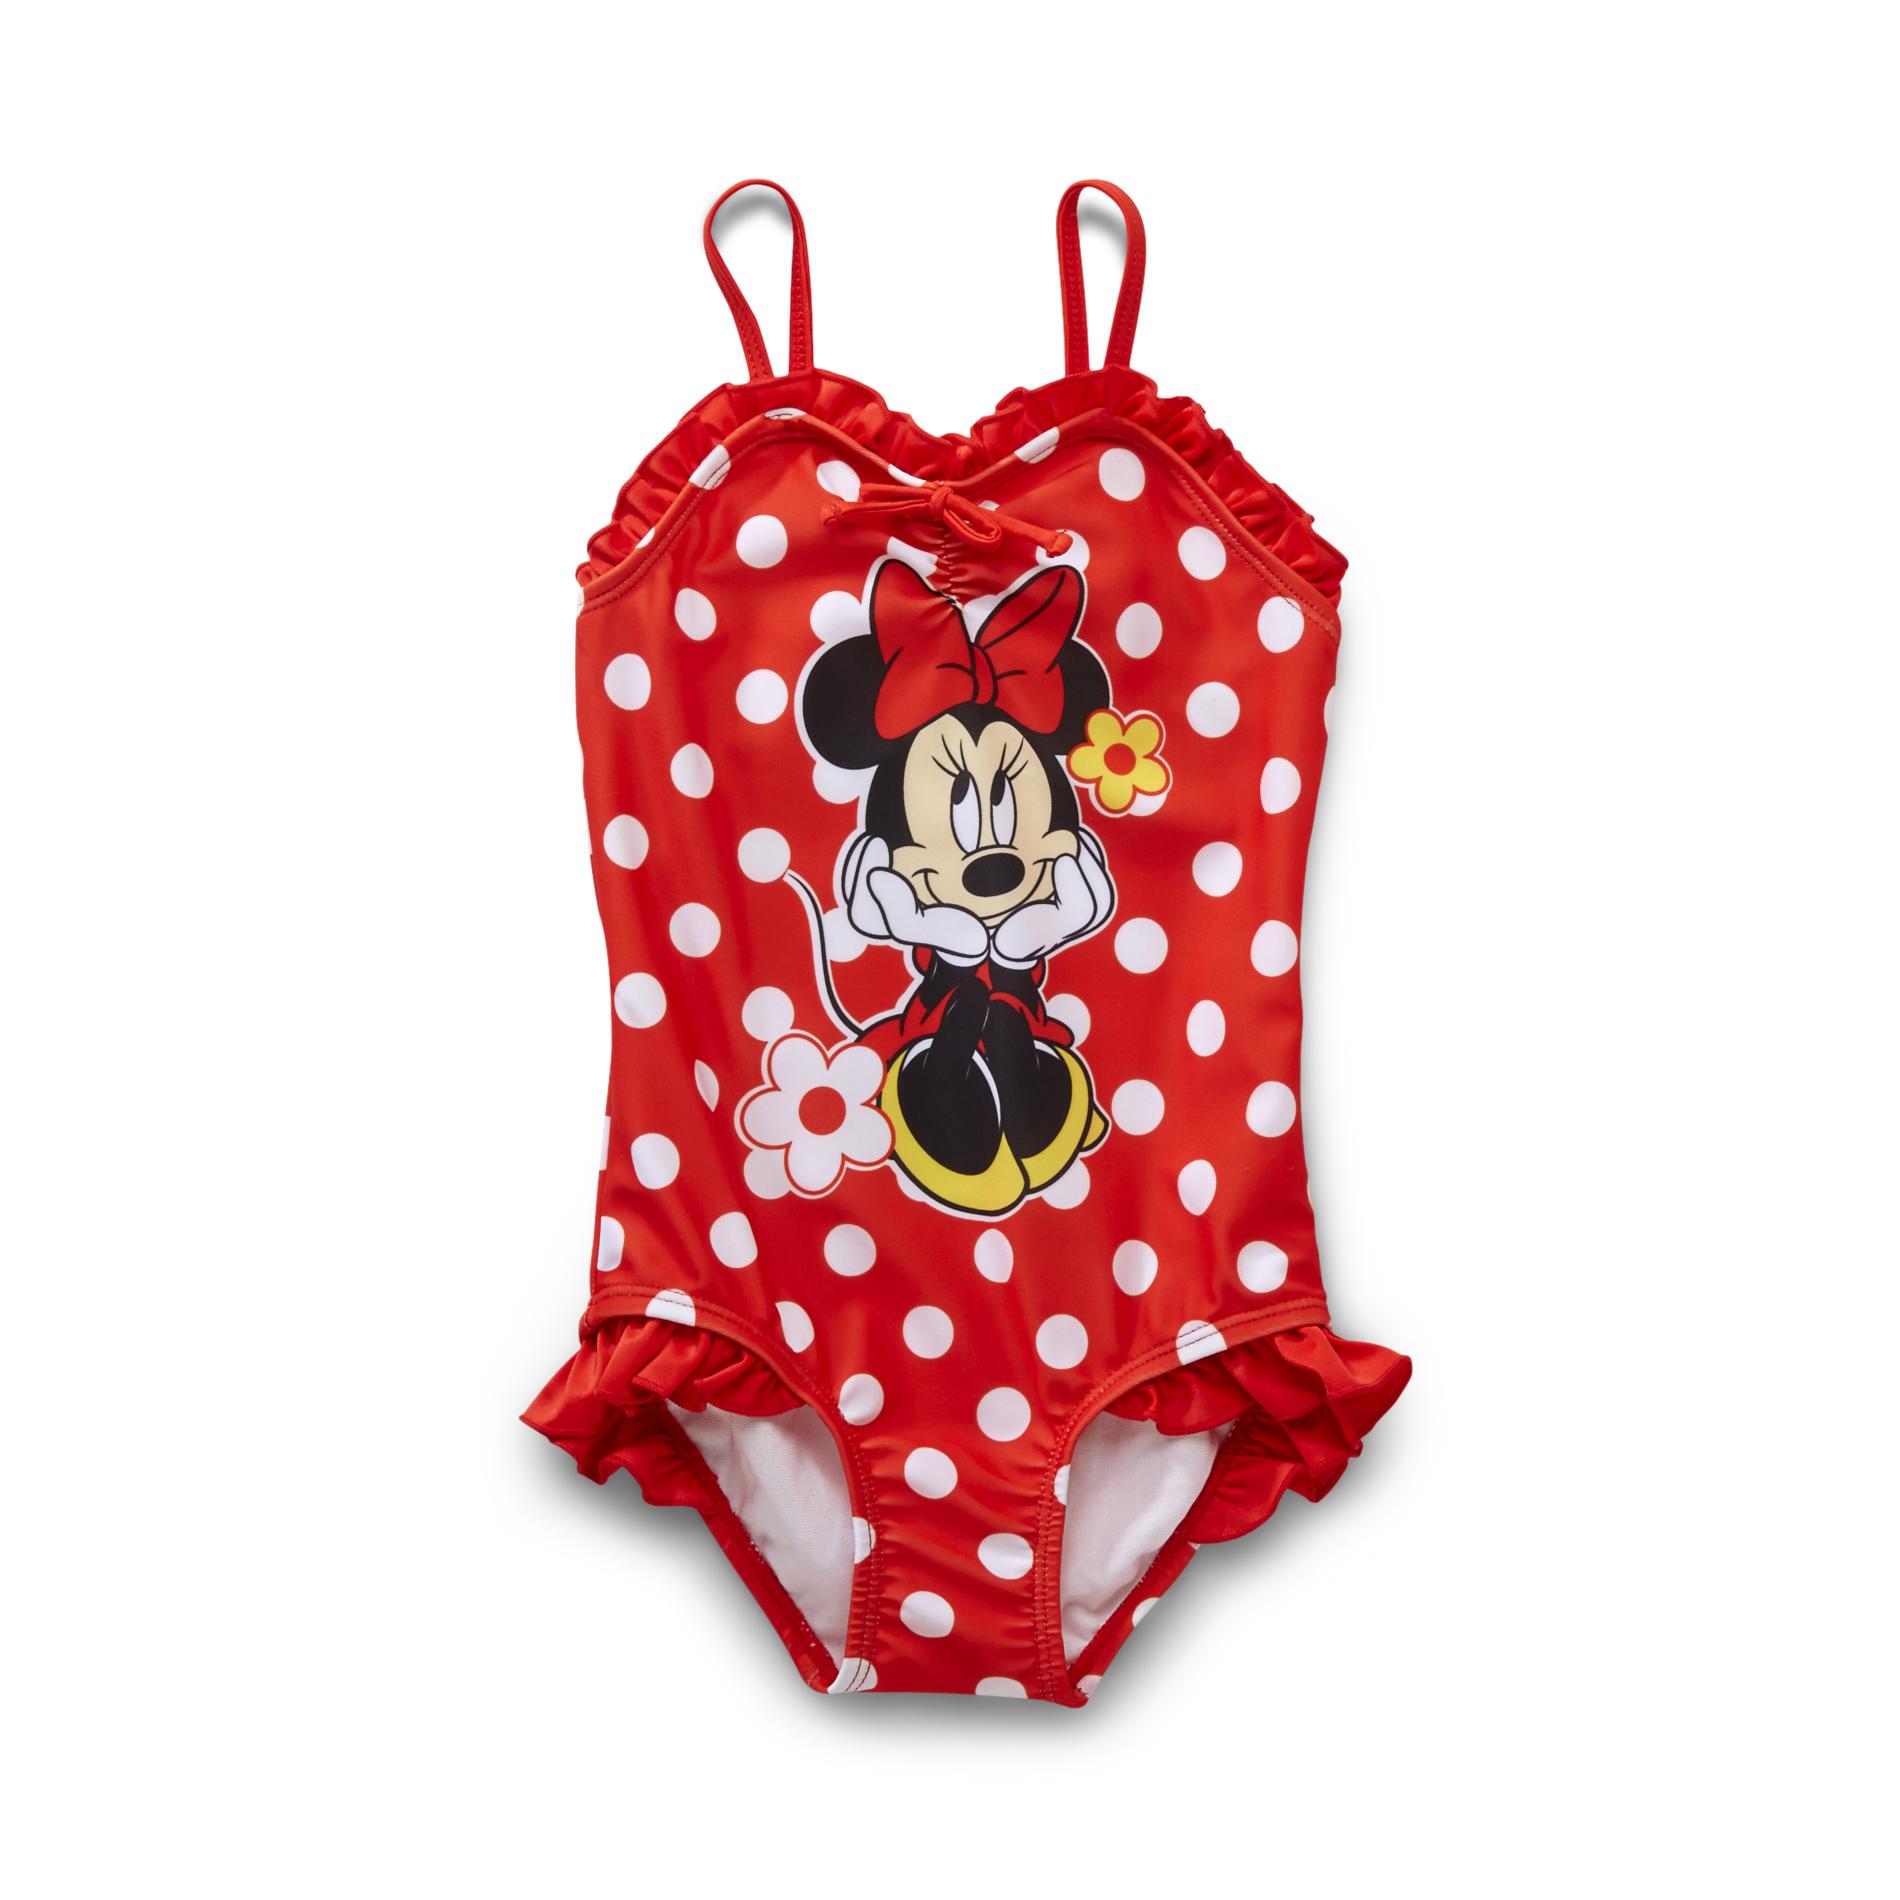 Disney Toddler Girl's One-Piece Swimsuit - Minnie Mouse